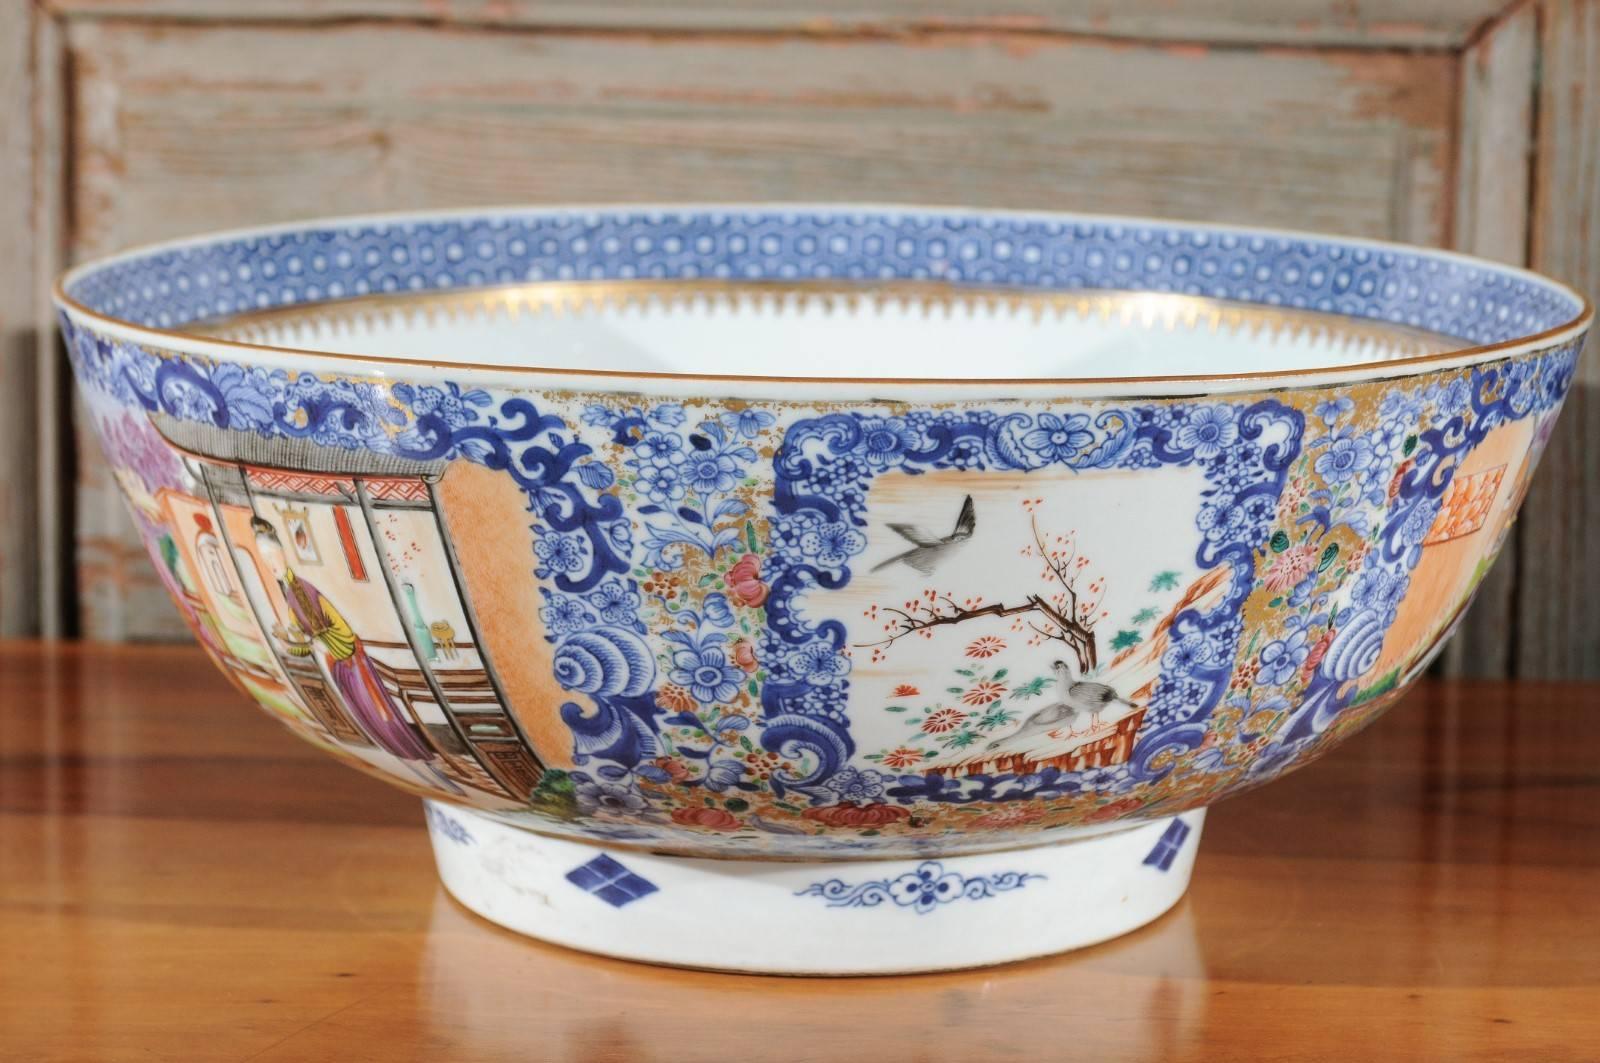 Large Chinese Export Punch Bowl in Mandarin Palette & Gilt Accents, ca. 1780 For Sale 1